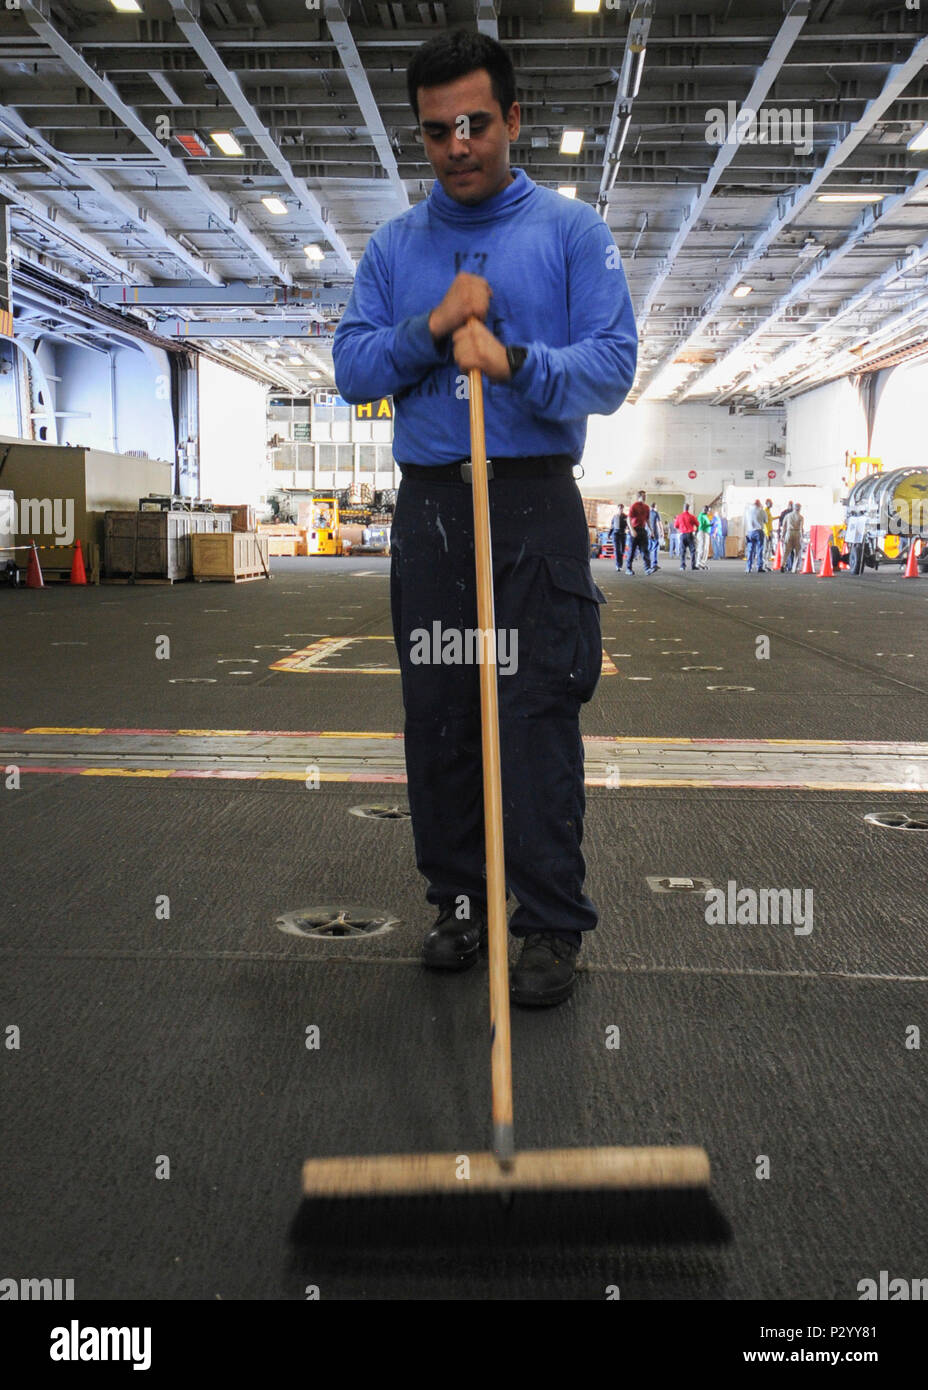 160812-N-KC543-068 ATLANTIC OCEAN (Aug. 12, 2016) - Airman Agustin Moreno, from Los Angelos, sweeps the nonskid in the hangar bay as a part of cleaning stations, a daily evolution aboard the aircraft carrier USS George Washington (CVN 73). George Washington, homeported in Norfolk, is underway conducting carrier qualifications in the Atlantic Ocean. (U.S. Navy photo by Mass Comunication Specialist 3rd Class Alora R. Blosch) Stock Photo